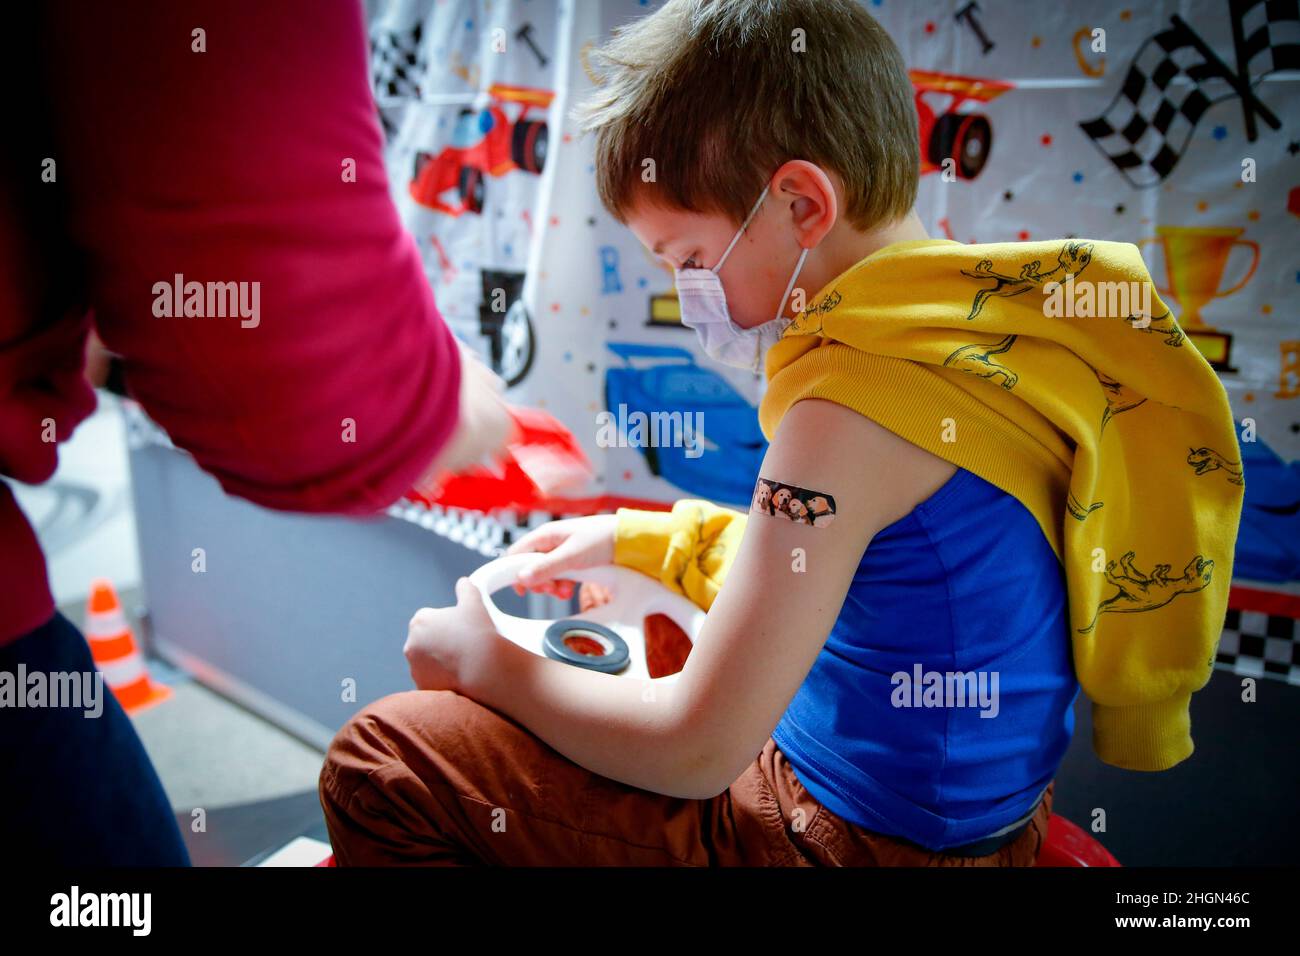 Iserlohn, Germany. 21st Jan, 2022. Iserlohn, Deutschland. 21st Jan, 2022. A boy has a patch stuck on after being vaccinated with the BioNTech/Pfizer children's vaccine in a COVID-19 vaccination and test center at the Olsen car dealership in Iserlohn, January 21, 2022. Credit: dpa/Alamy Live News Credit: dpa picture alliance/Alamy Live News Stock Photo